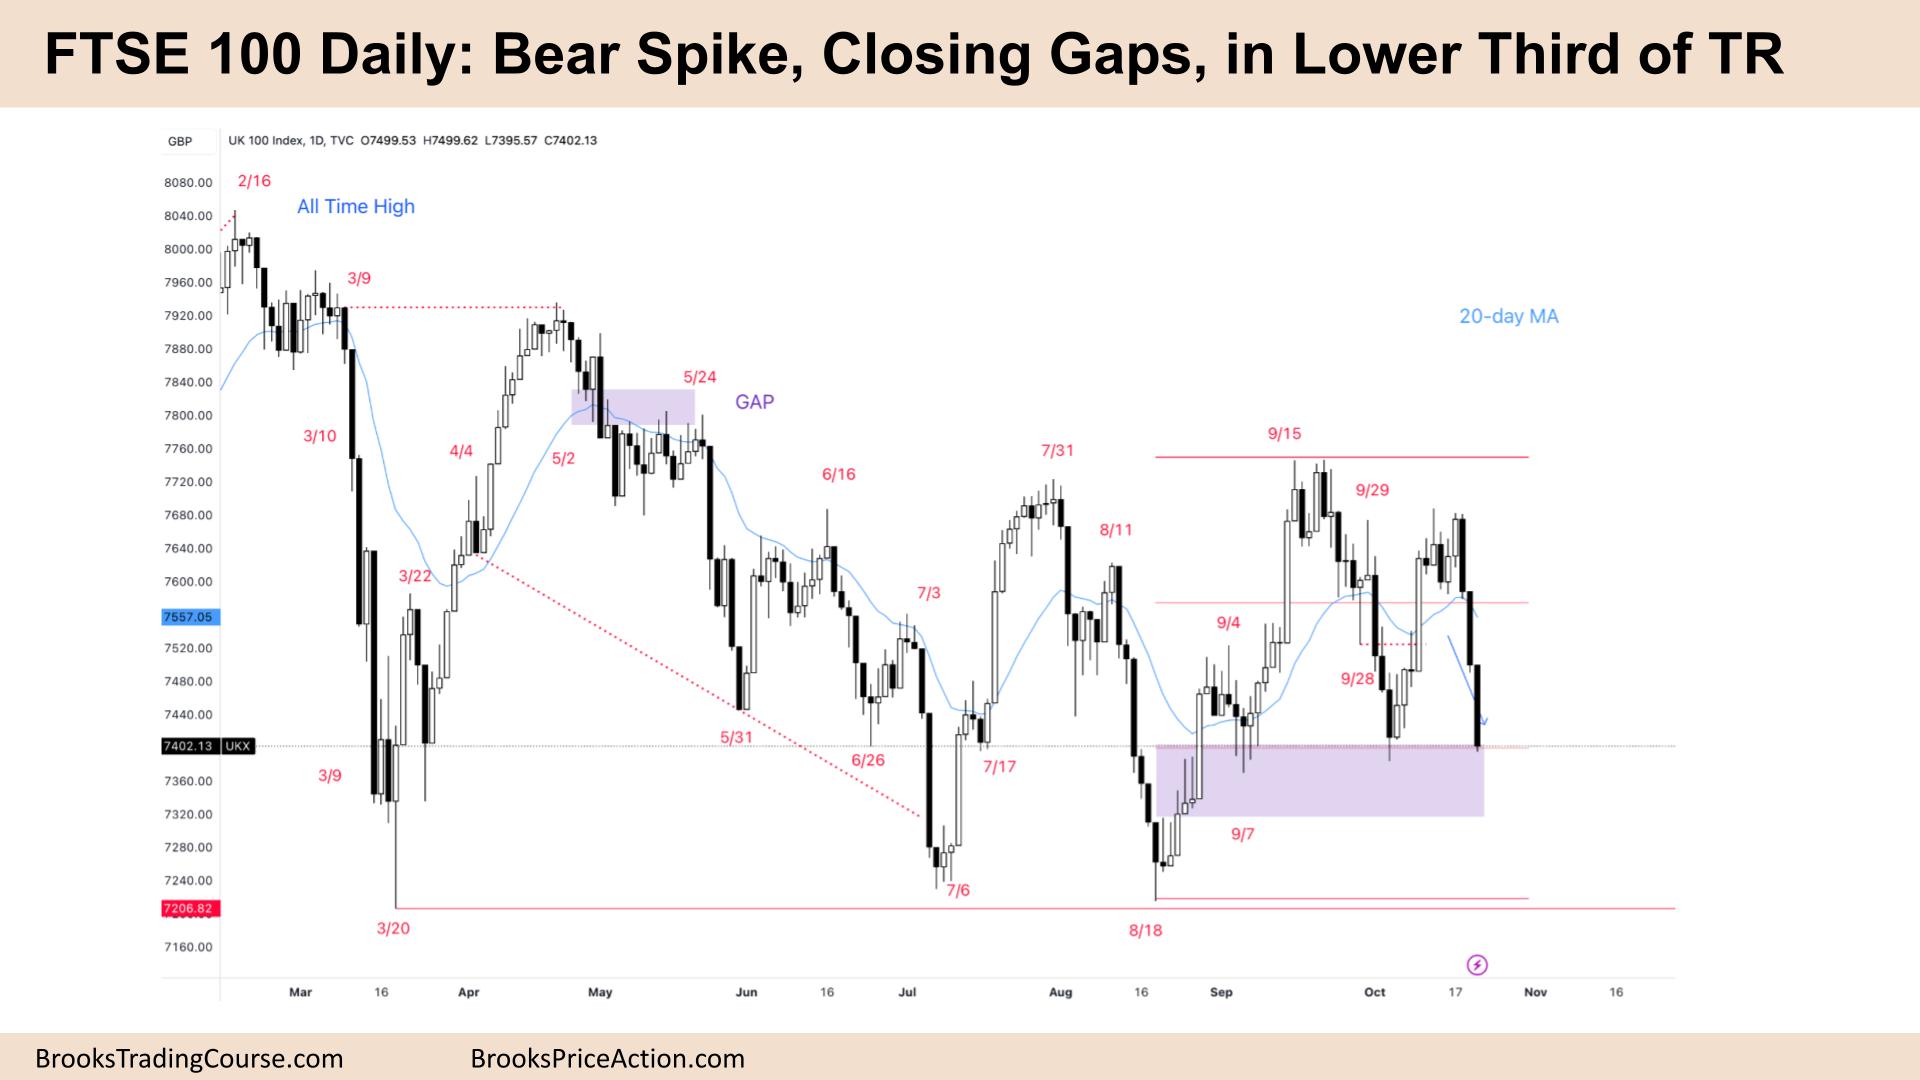 FTSE 100 Bear Spike, Closing Gaps, in Lower Third of TR